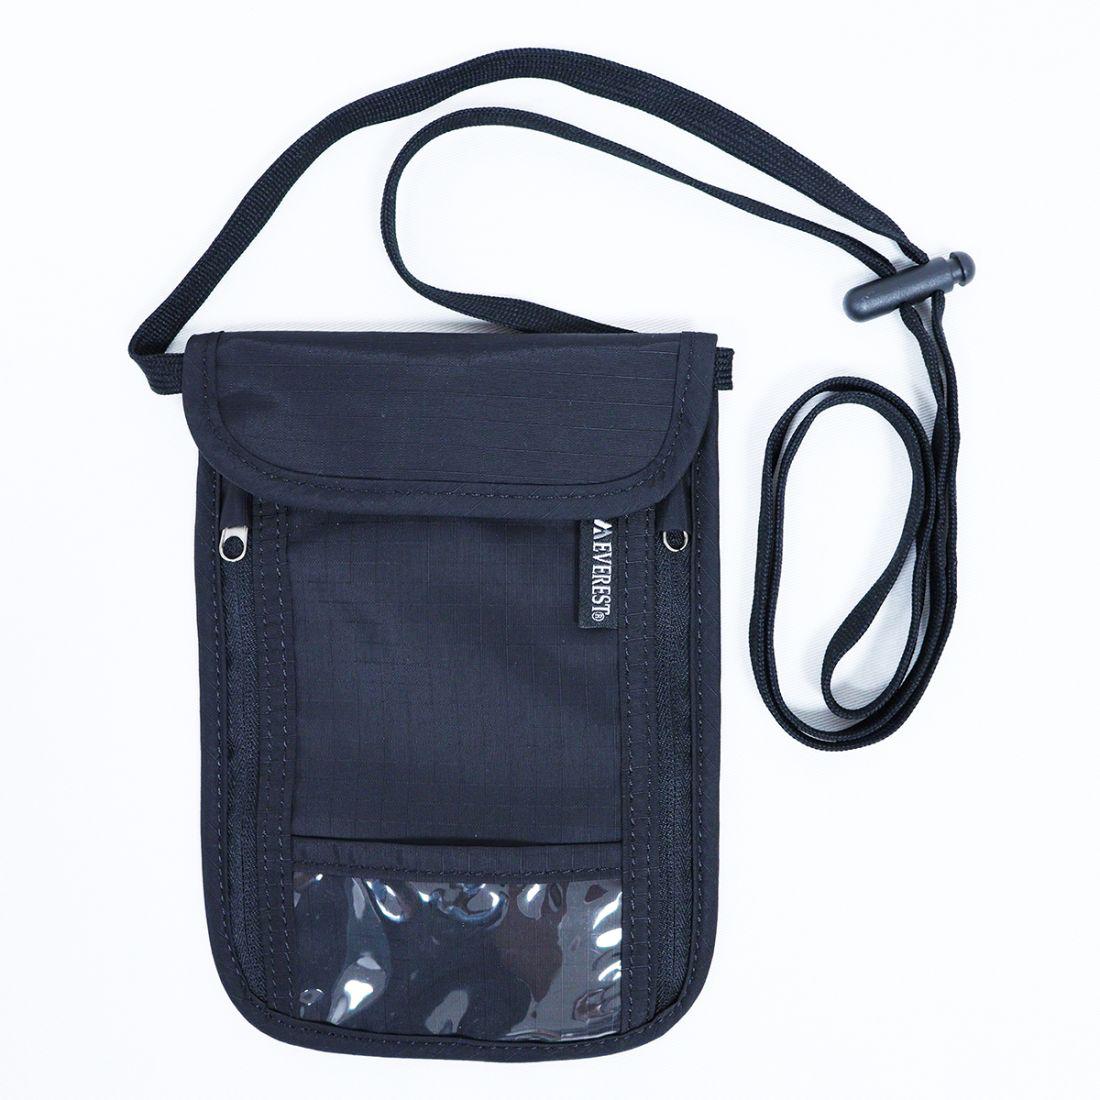 Everest Passport and Credit Card Neck Pouch